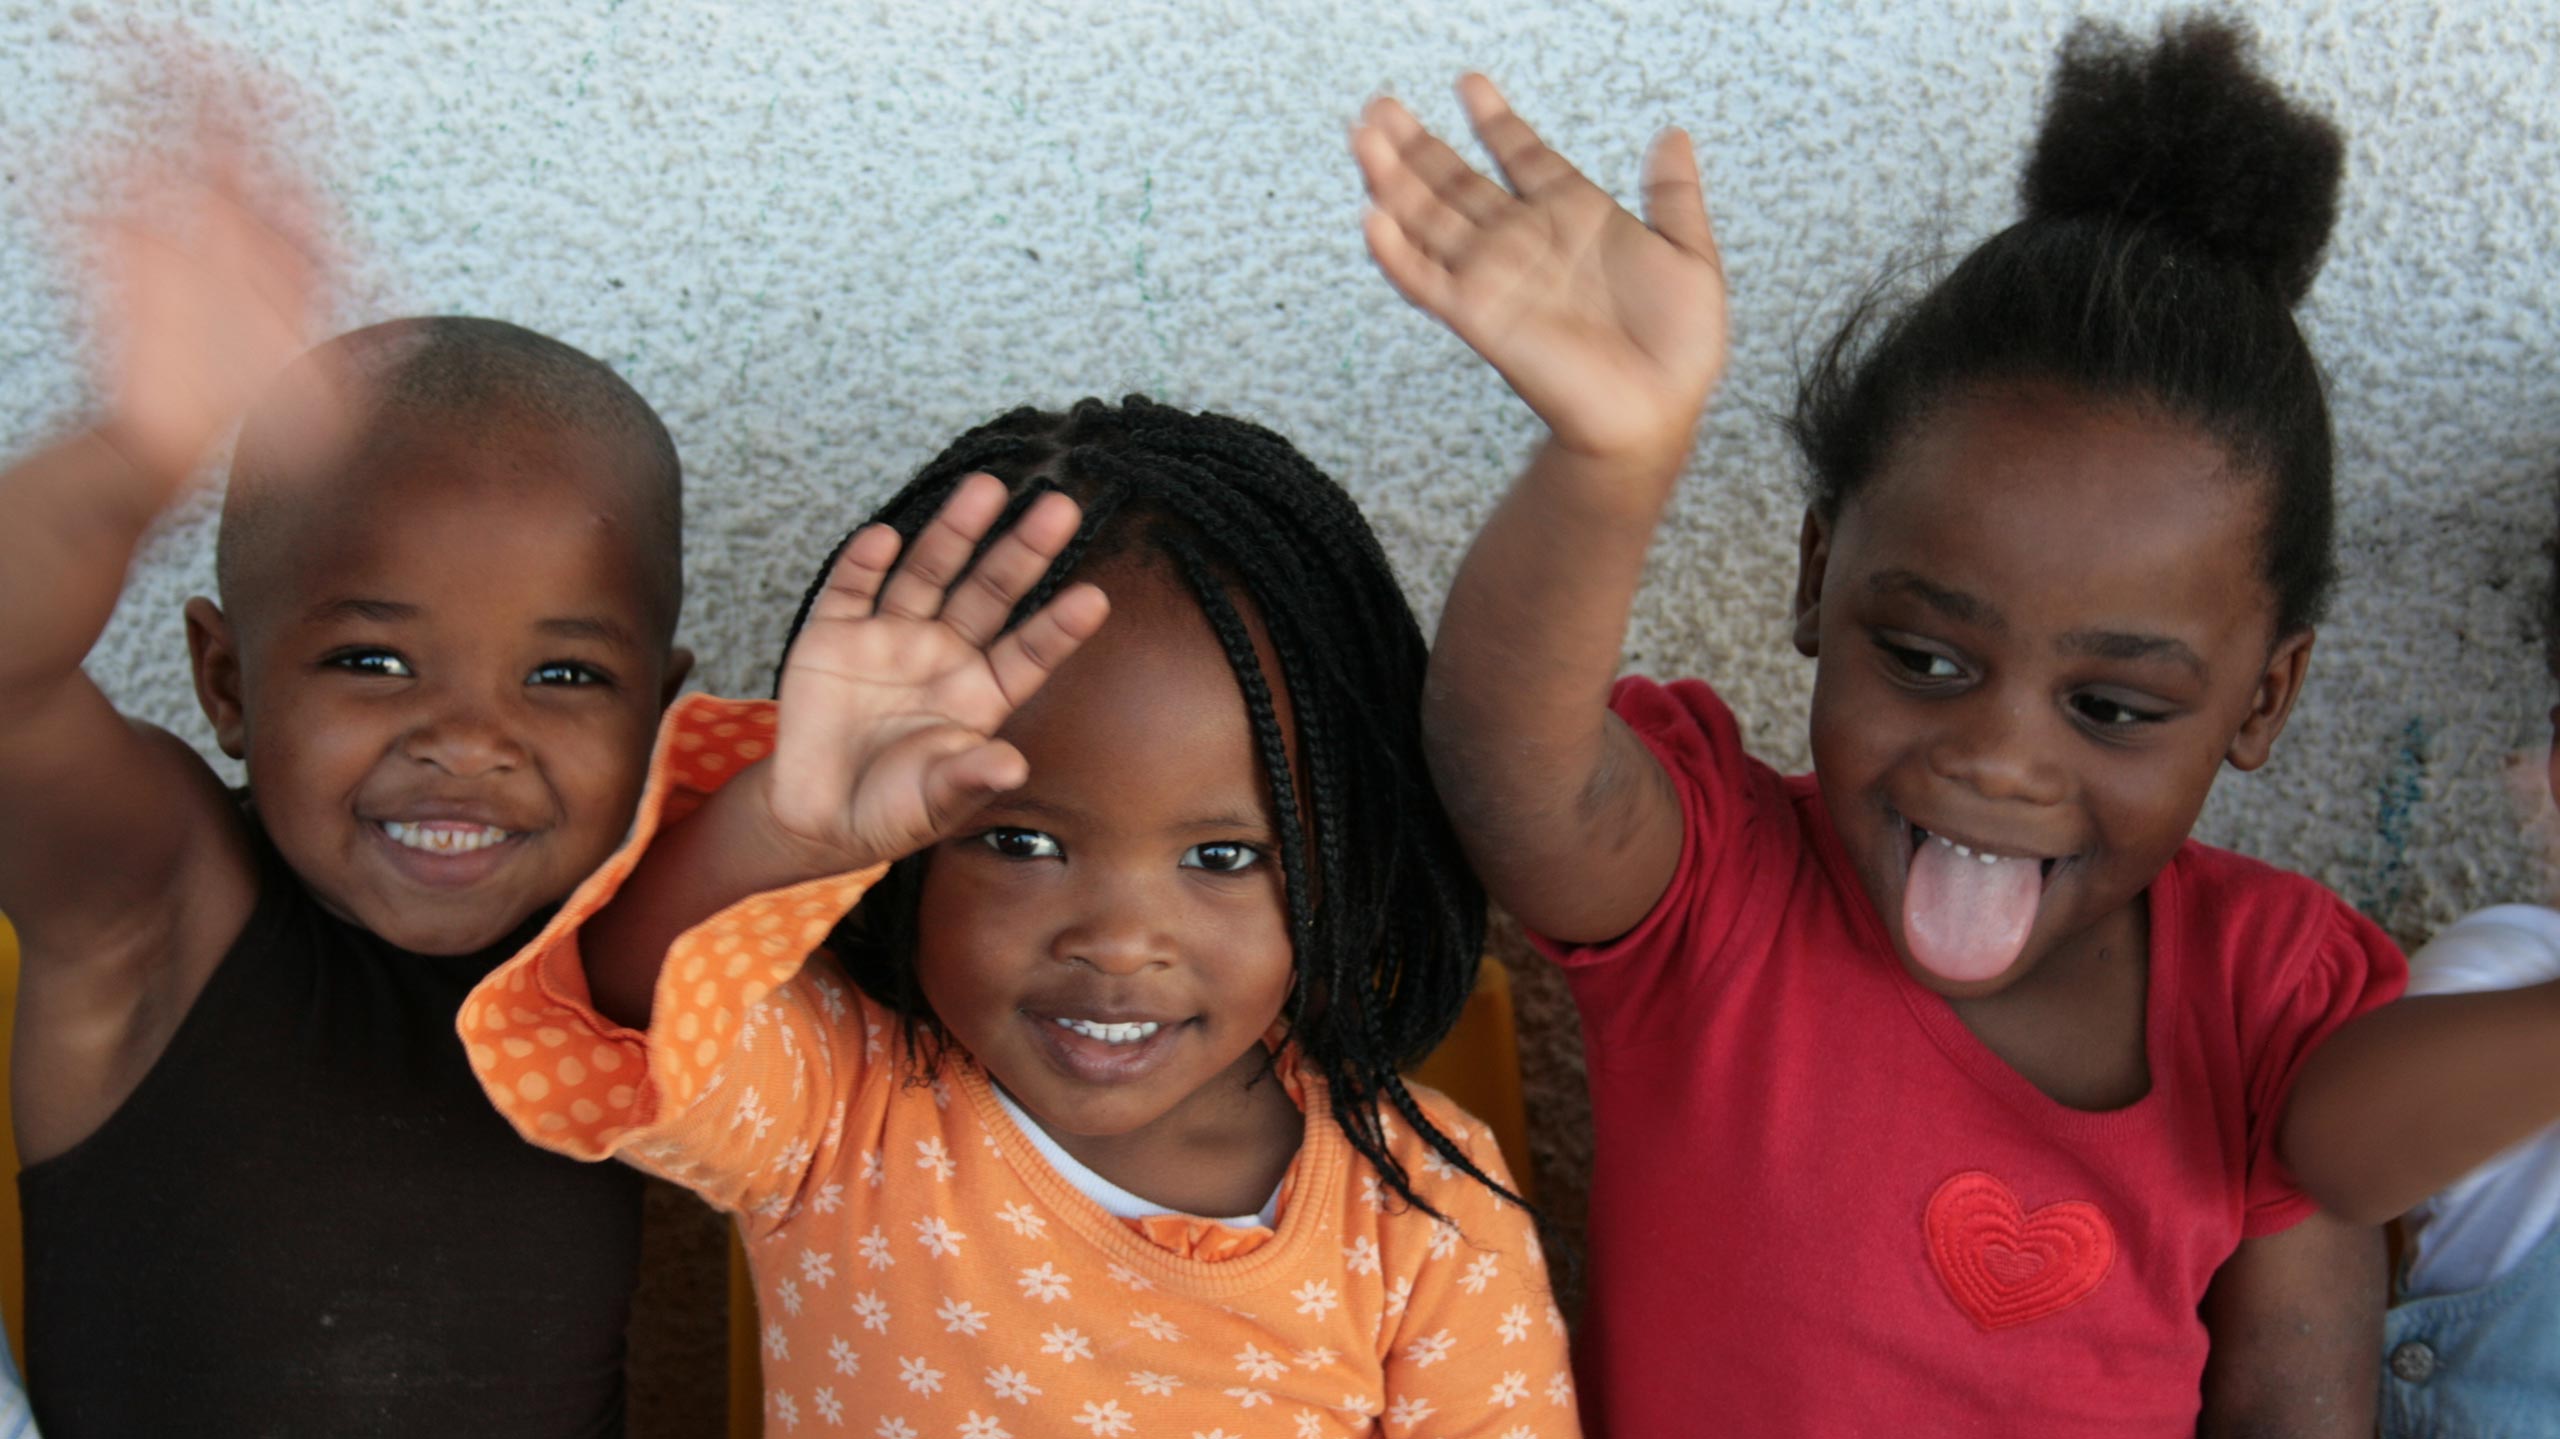 Children waving at camera in Cape Town, South Africa